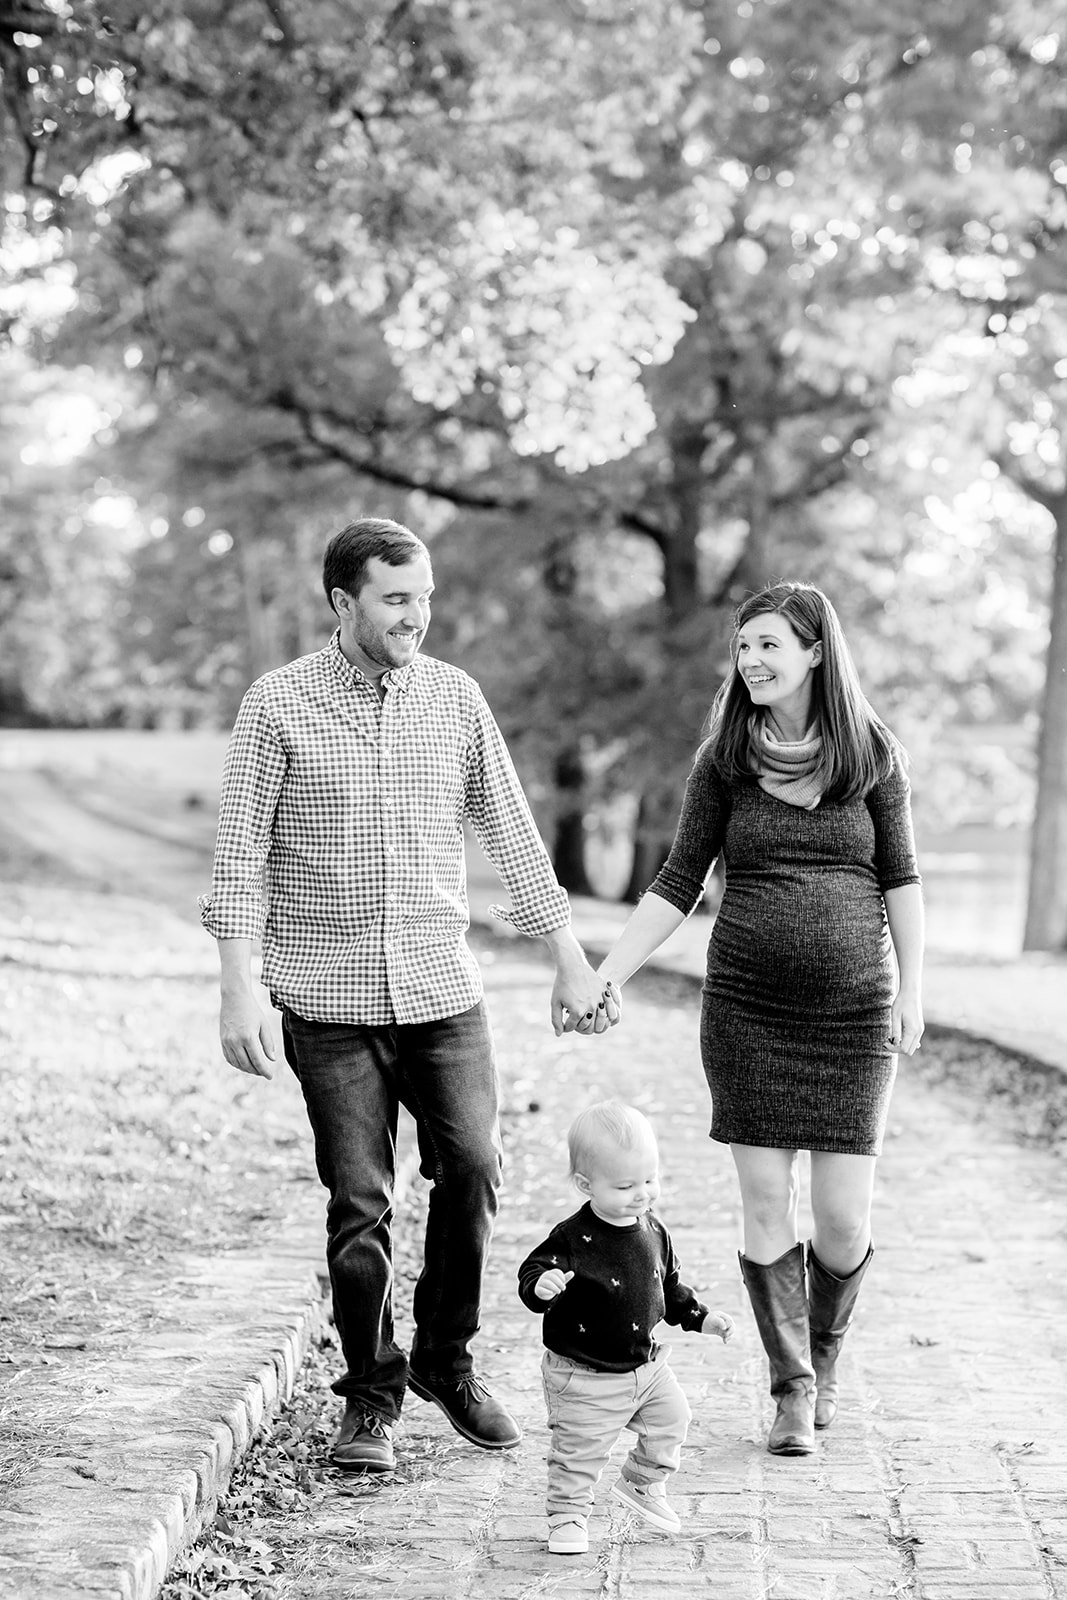 Gregory Family Fall Maternity Photos - Image Property of www.j-dphoto.com